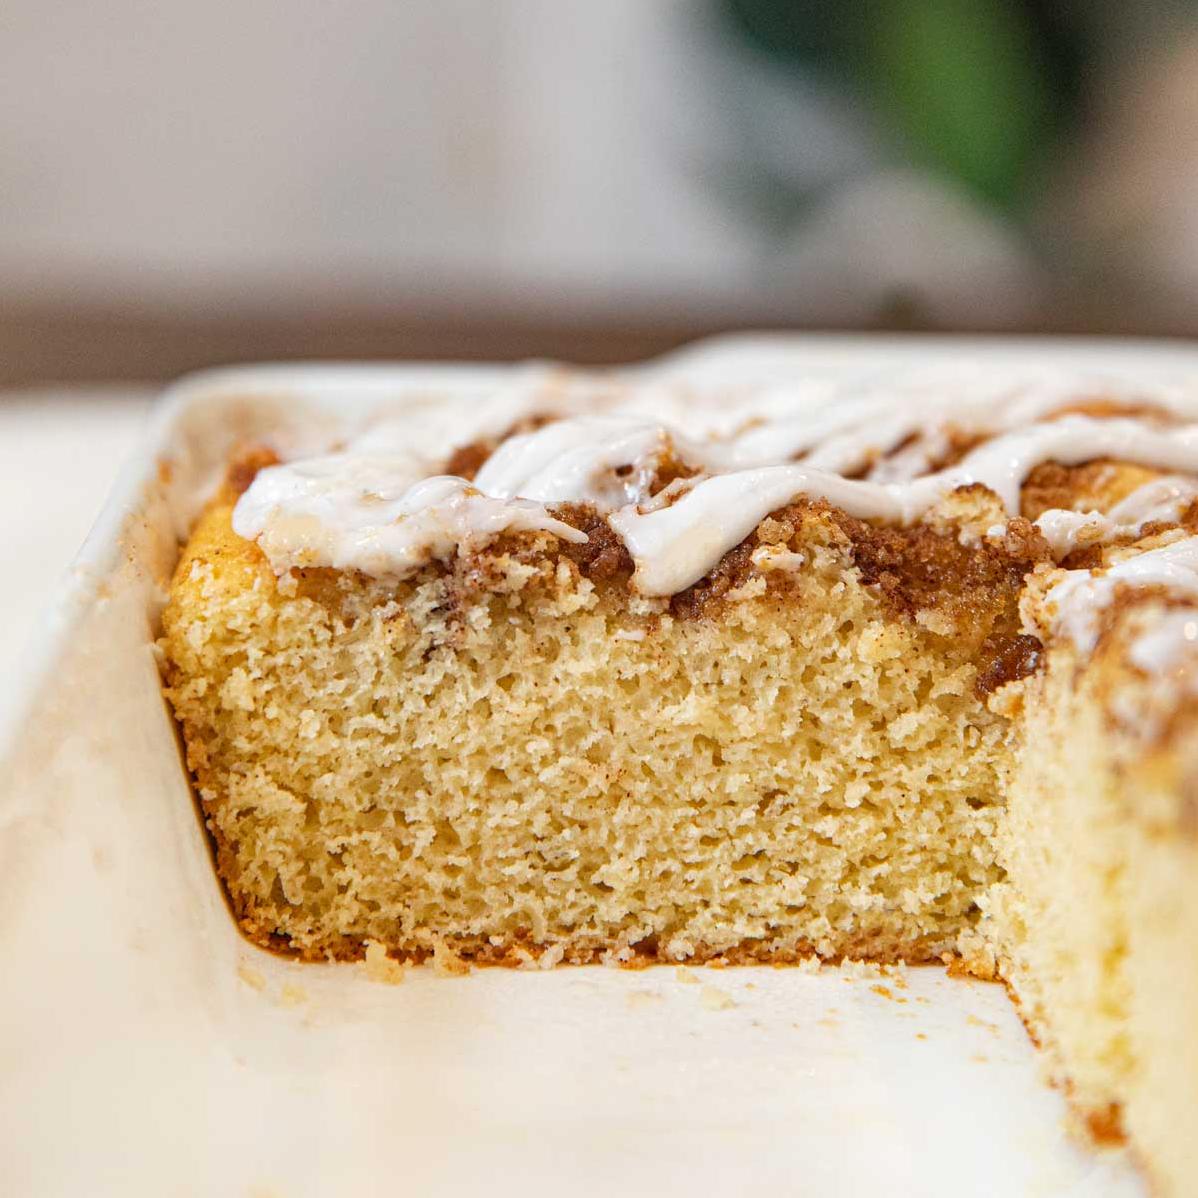  With the perfect balance of sweetness and spice, this coffee cake is a crowd-pleaser